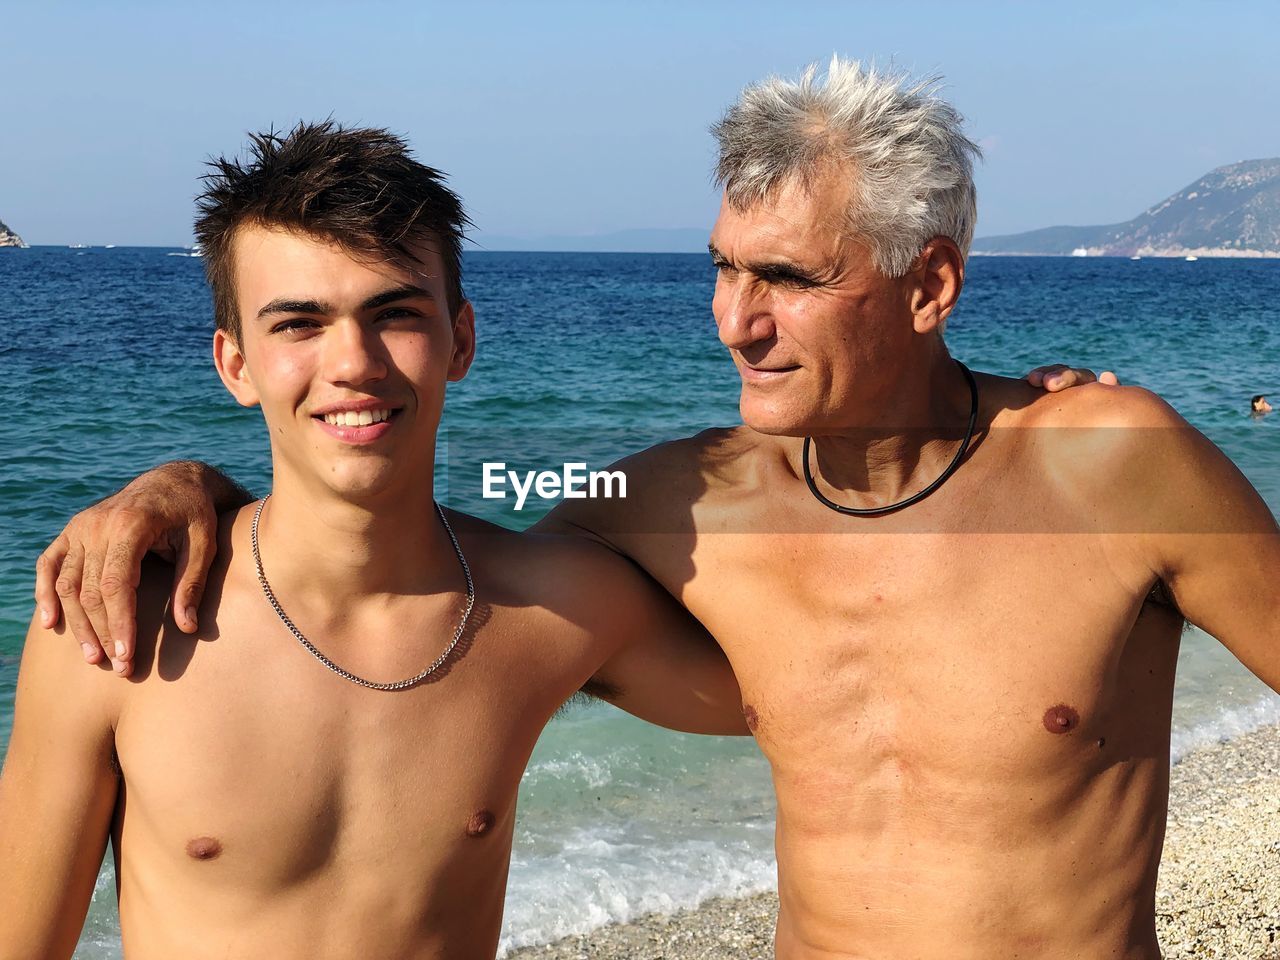 Smiling father and son at beach against sky